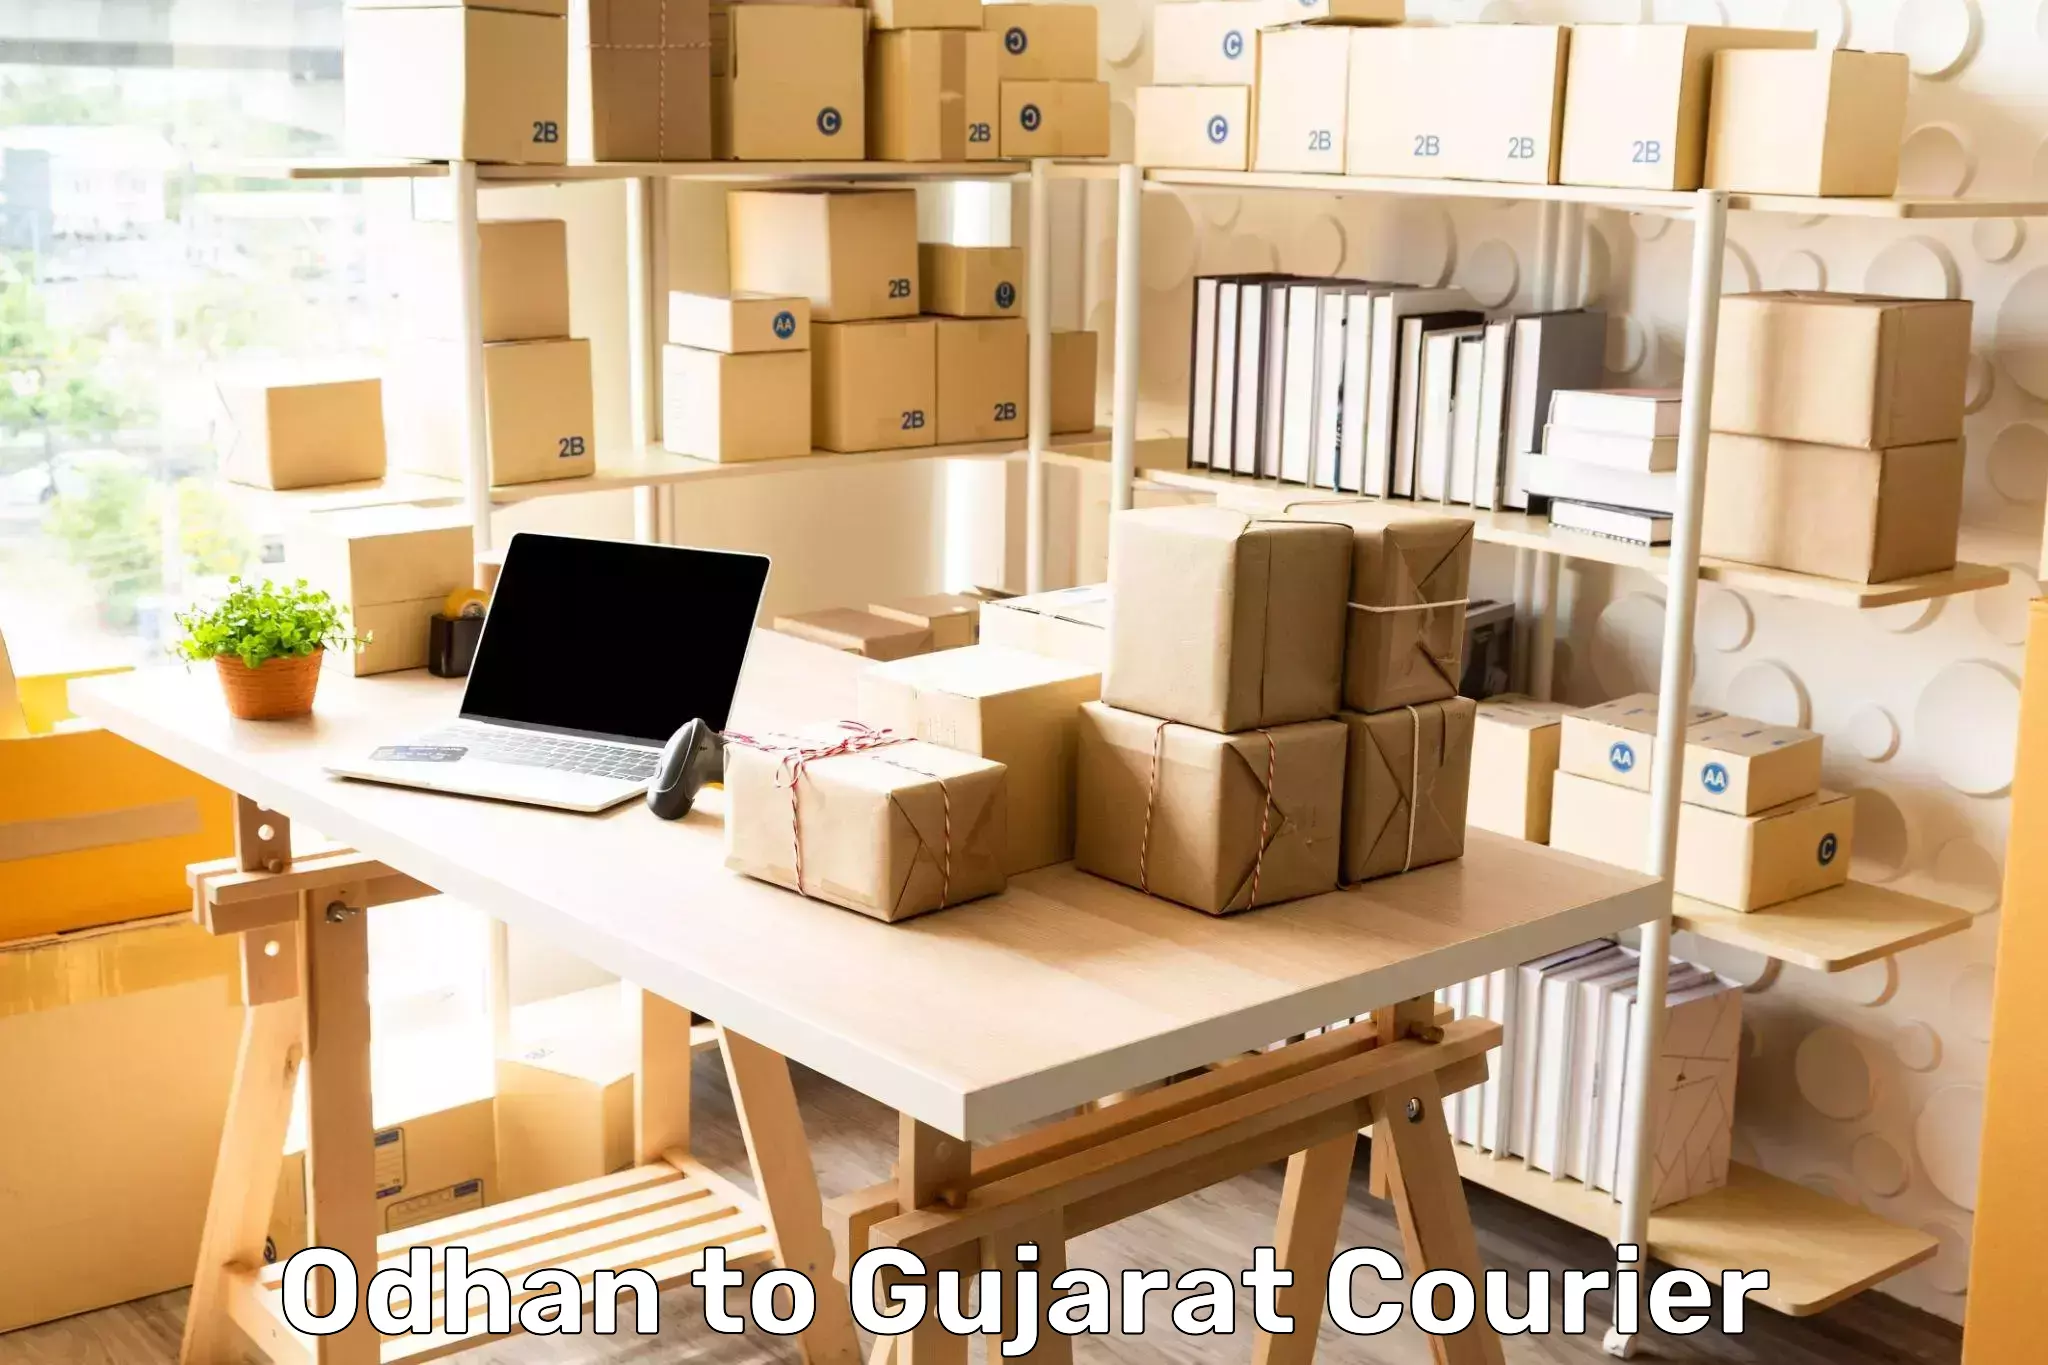 Cost-effective courier options Odhan to Gujarat